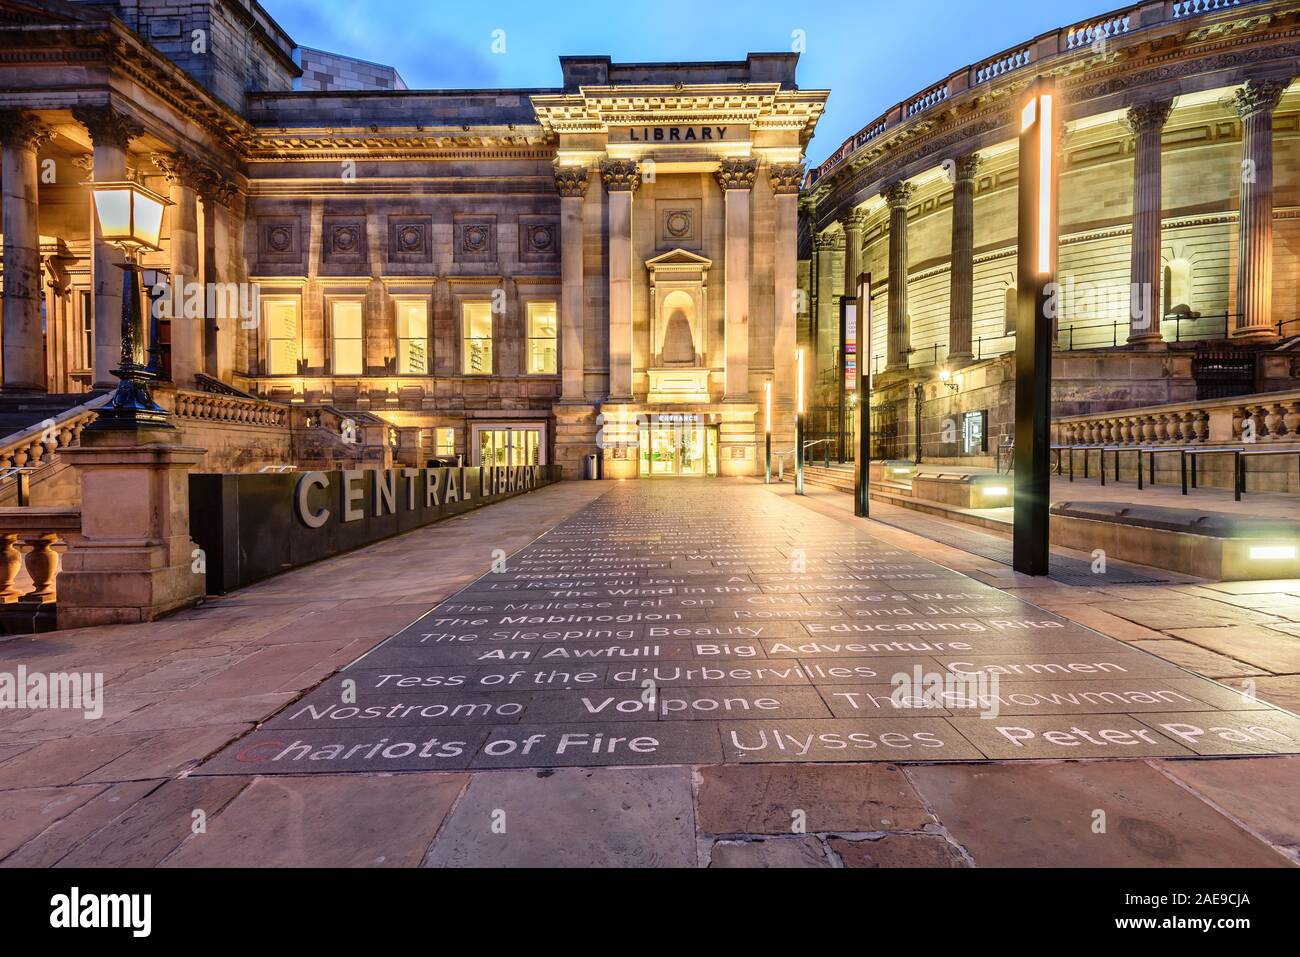 LIVERPOOL, ENGLAND - MAY 19, 2015: View of the external floor of the Liverpool Central Library. Stock Photo